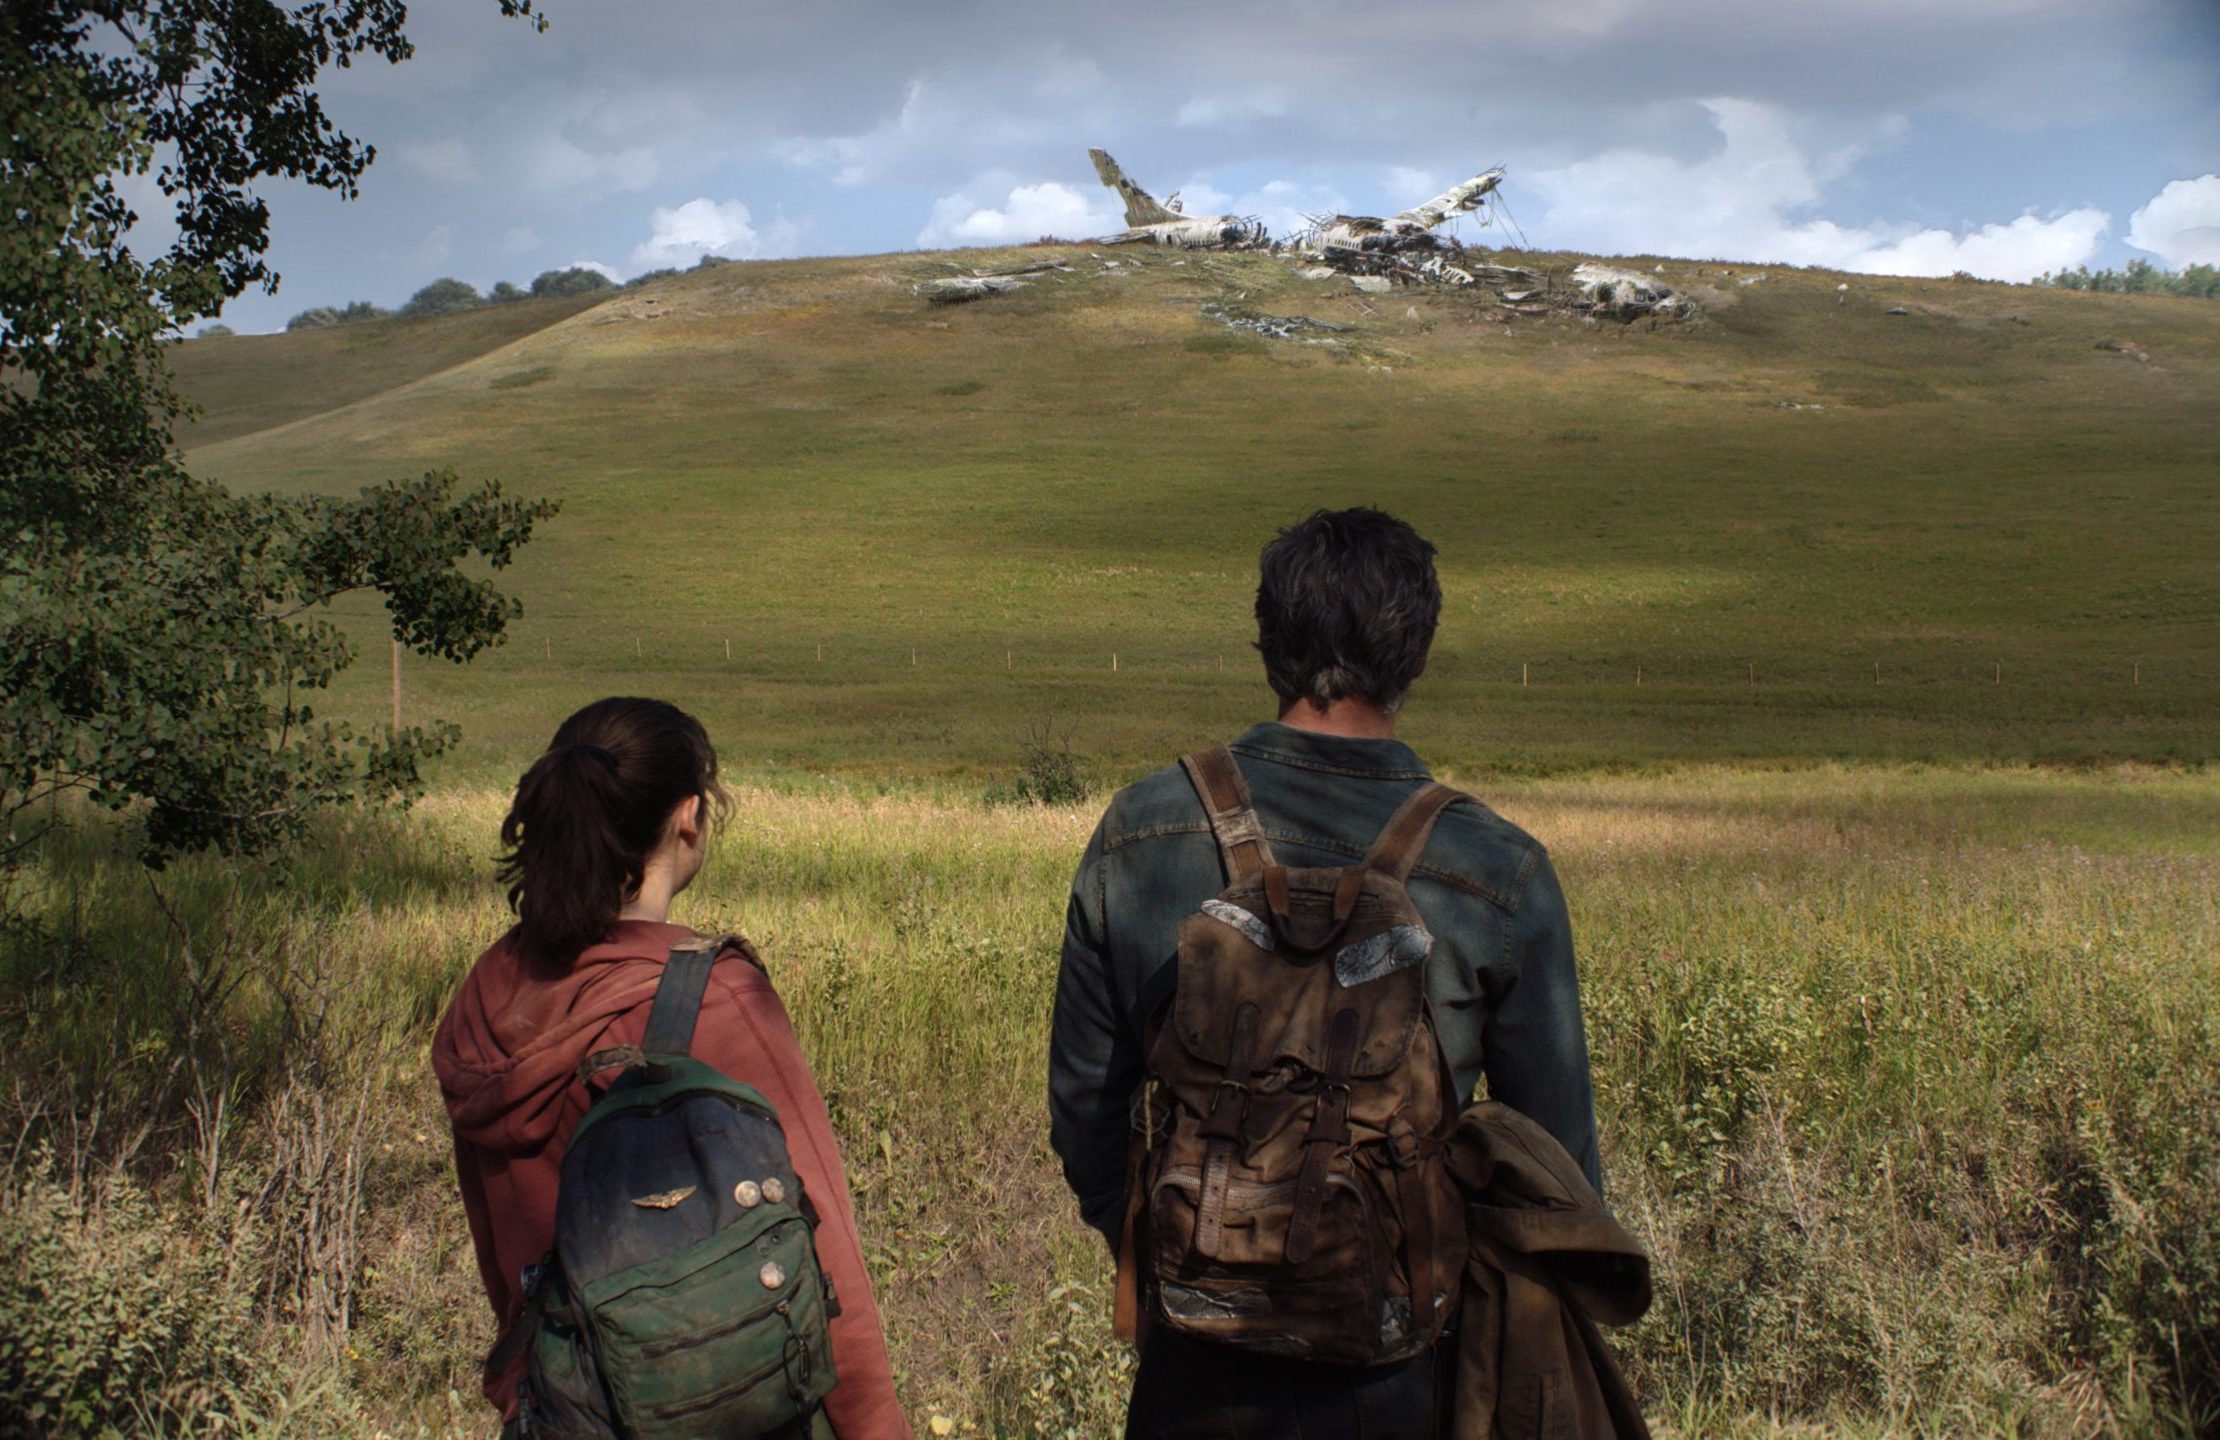 The Last Of Us | HBO Drops New Image Of Pedro Pascal And Bella Ramsey As Joel And Ellie